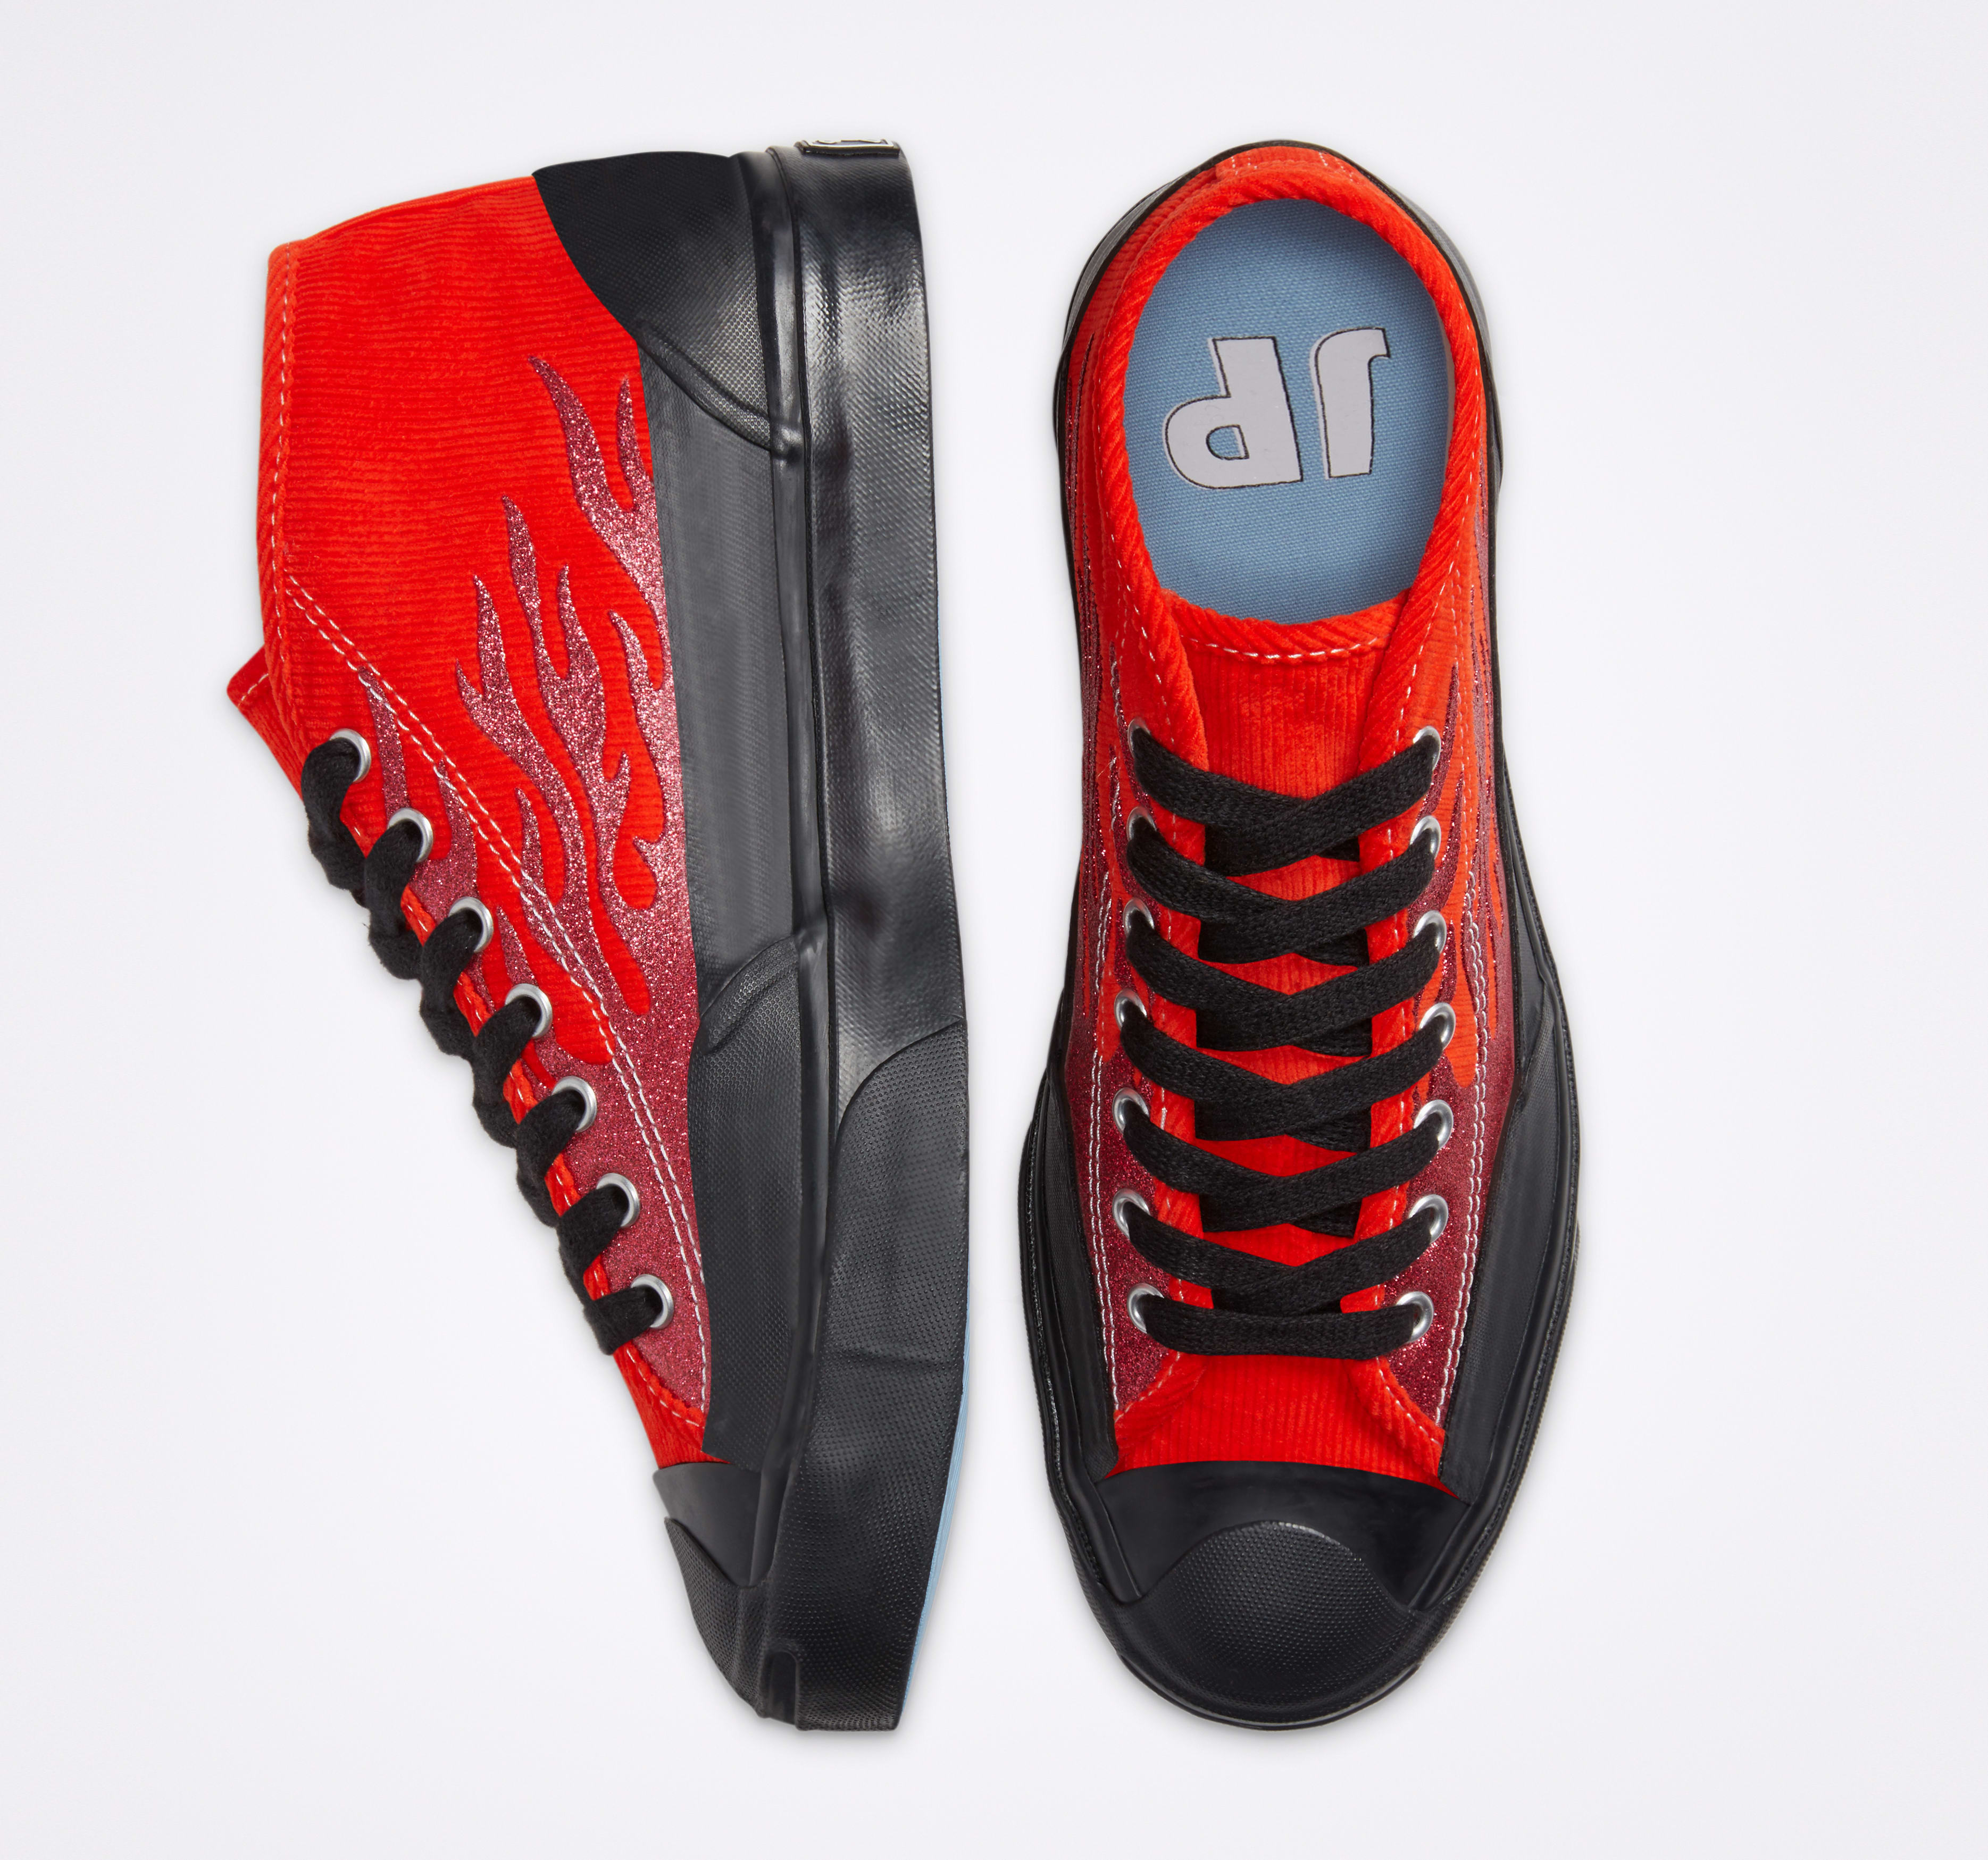 ASAP Nast Has Two New Converse Jack Purcell Mids Dropping This | Complex